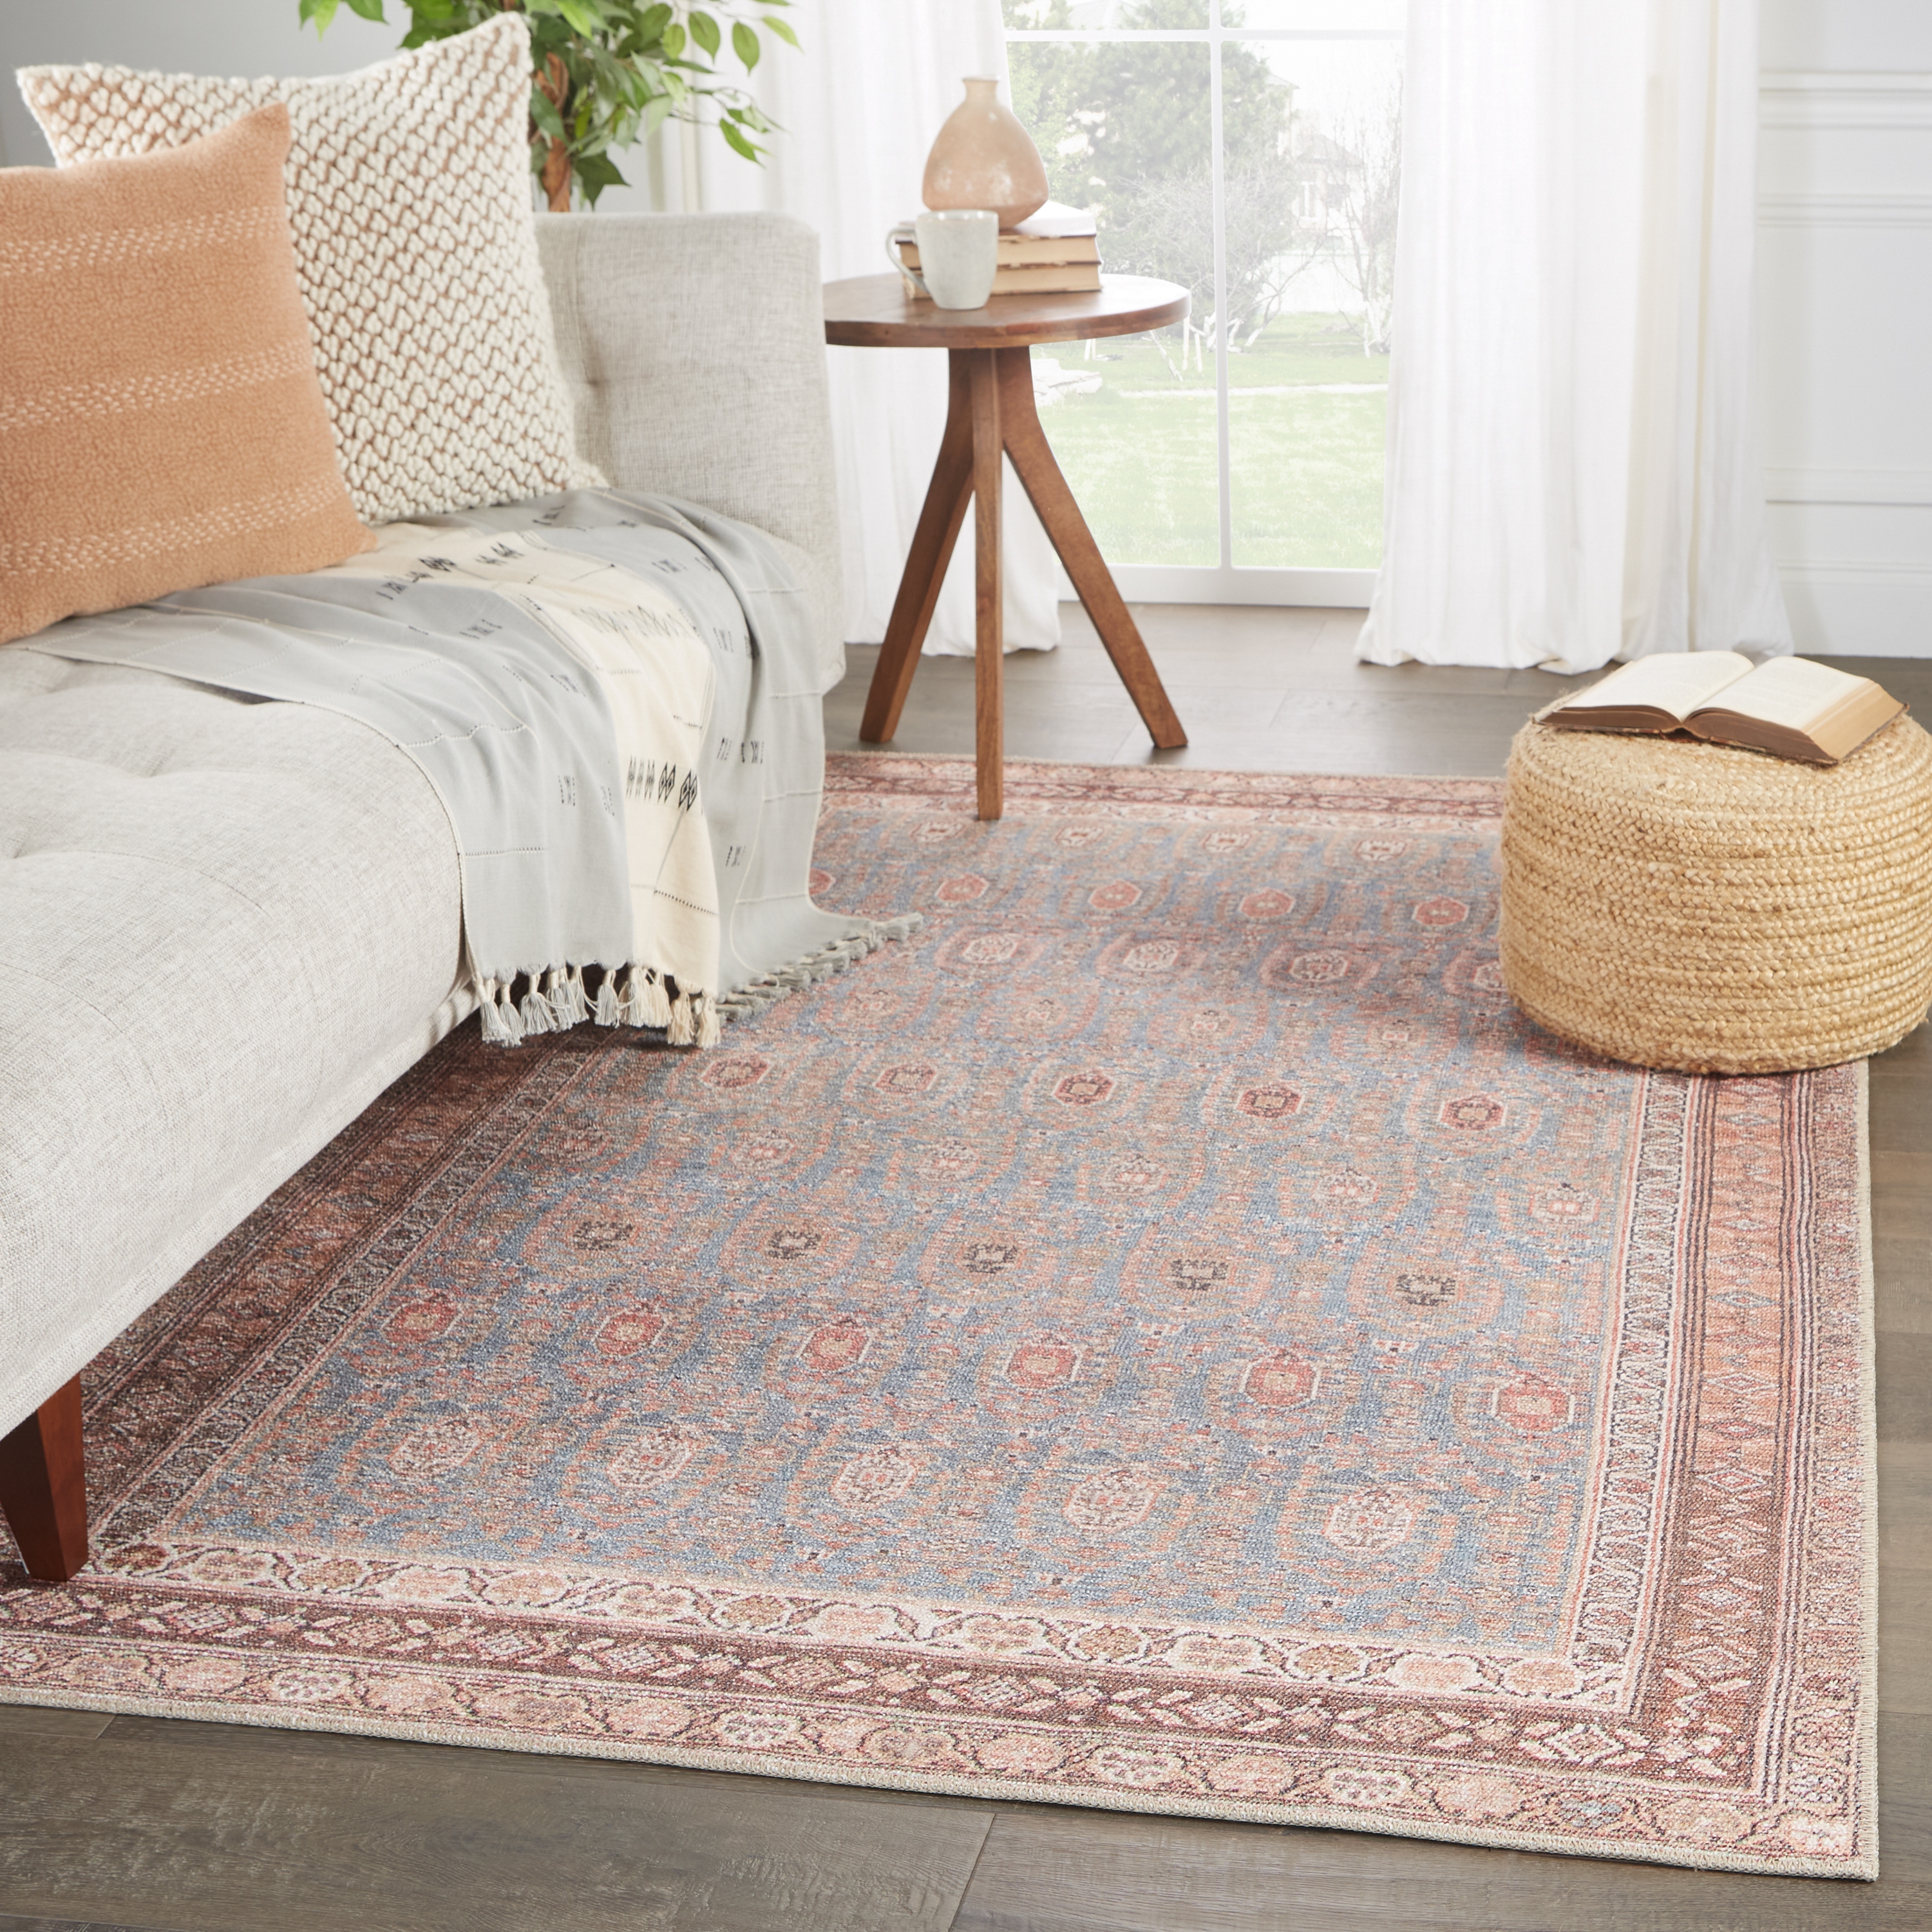 Vibe by Tielo Oriental Area Rug, Blue & Brown, 5 ' x 7'6" - Image 4